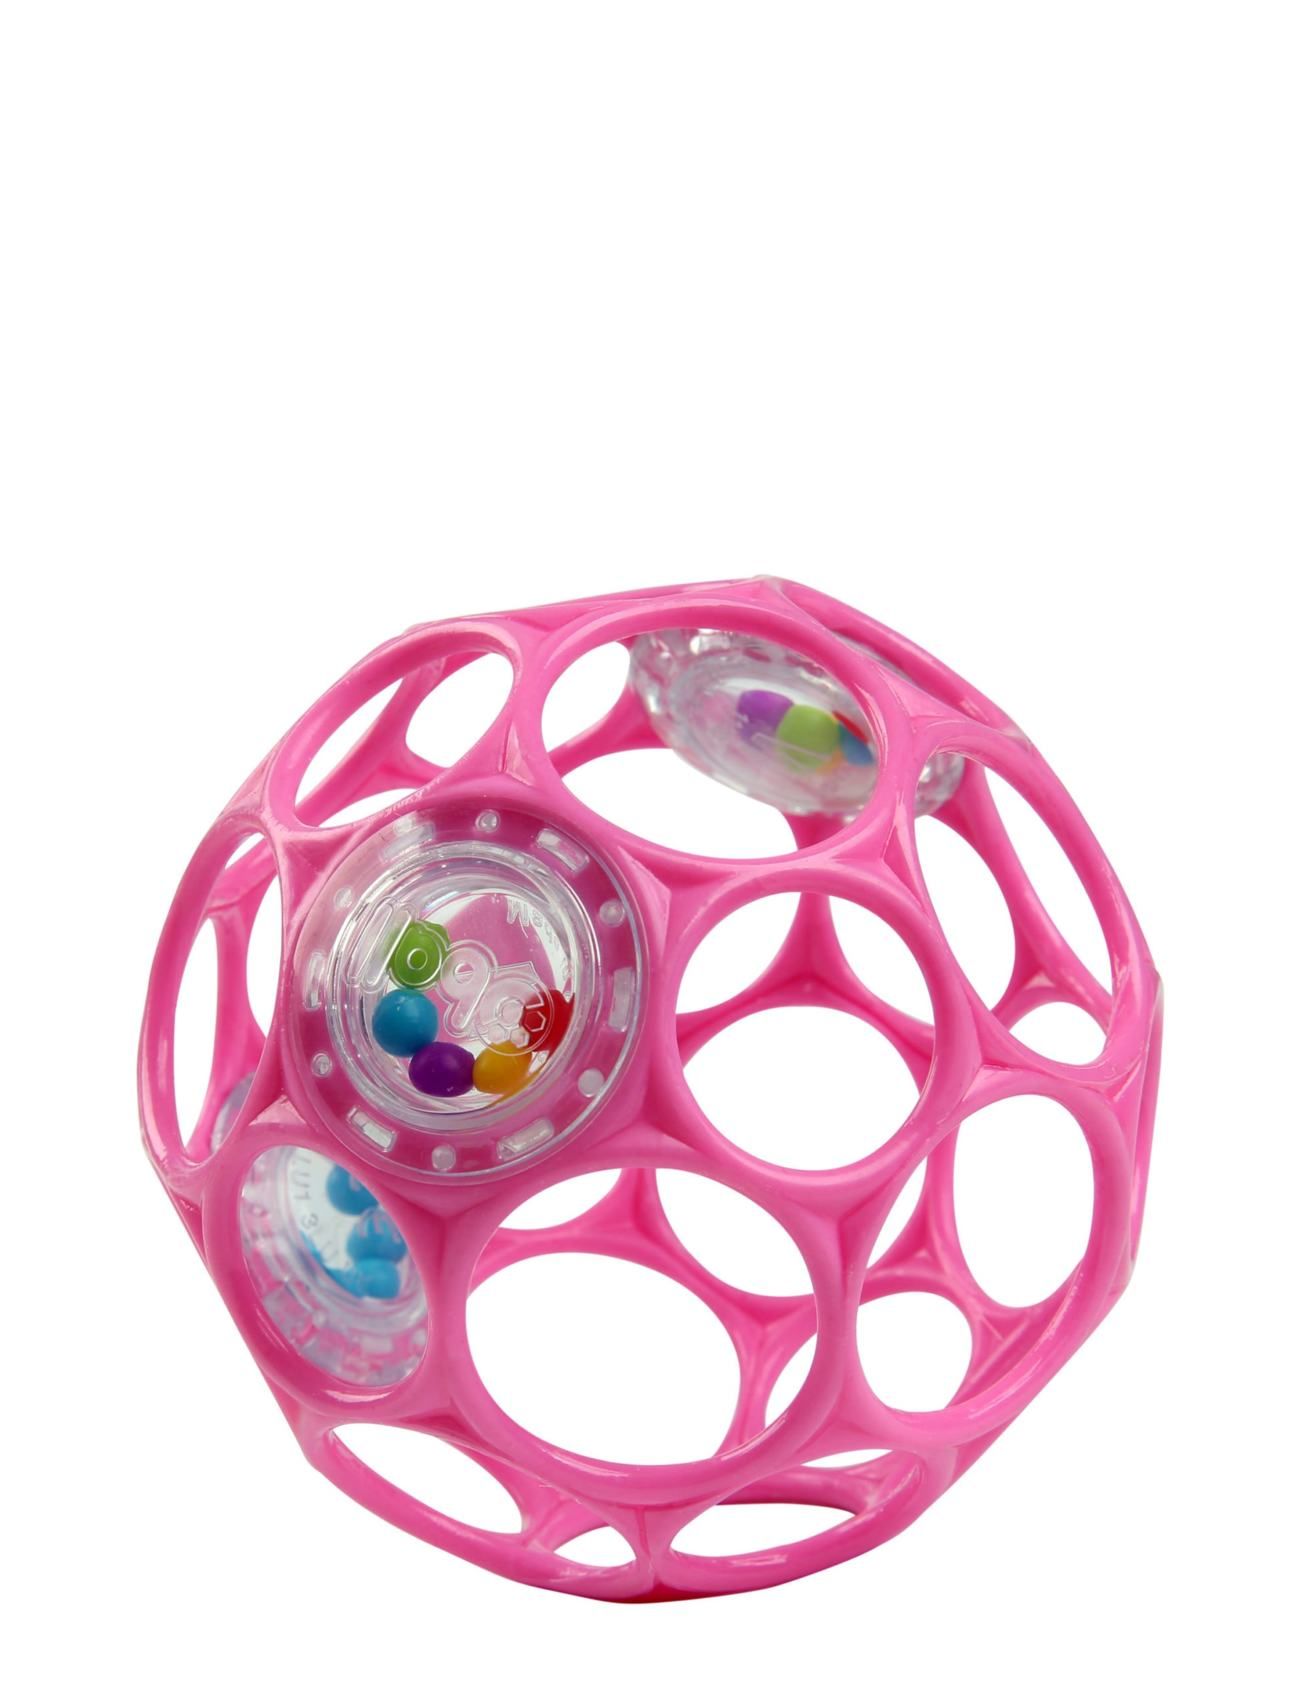 Oball Rattle - Pink Toys Baby Toys Educational Toys Activity Toys Pink Oball